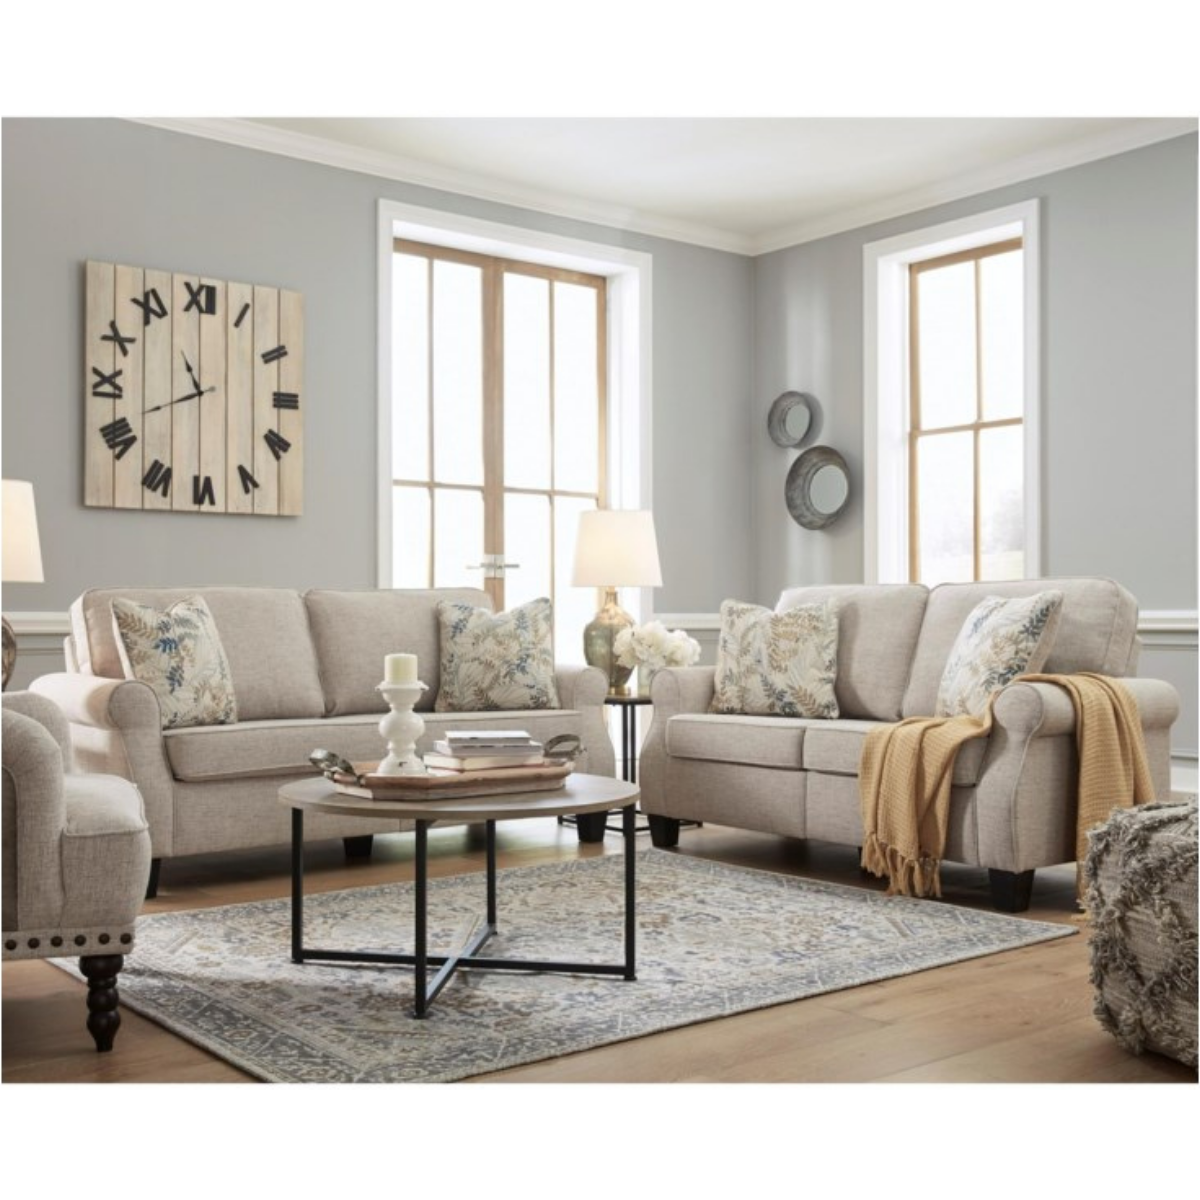 Ashley Alessio 8240435/38 Living Room Group $1405.00 90 Days Same as Cash*